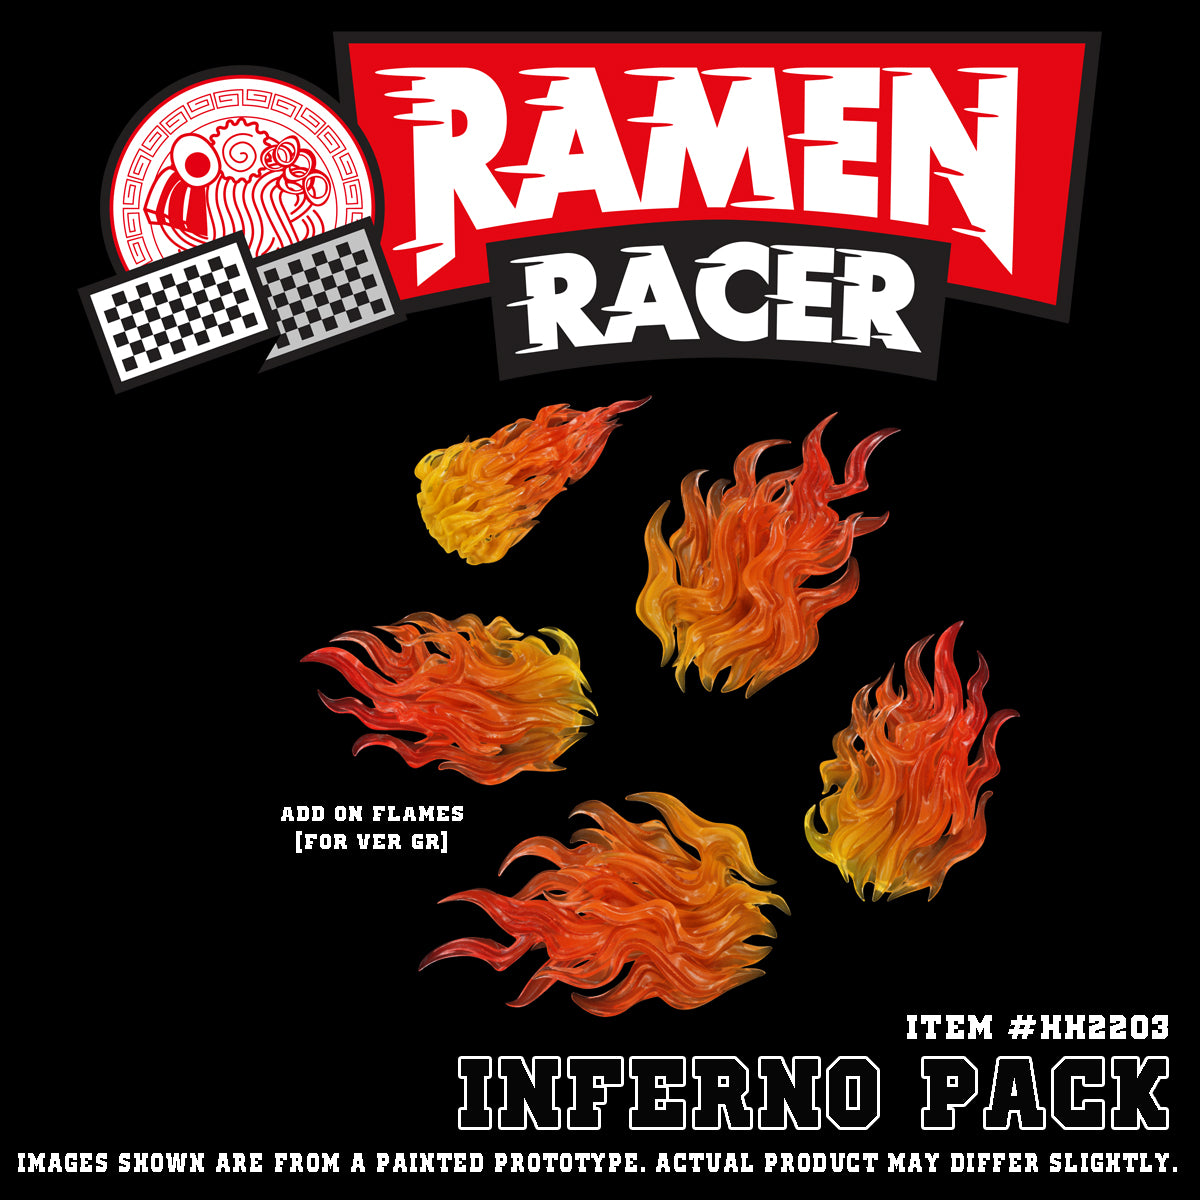 ITEM #HH2203 - INFERNO PACK for RAMEN RACER (ADVANCE PRE-ORDER)